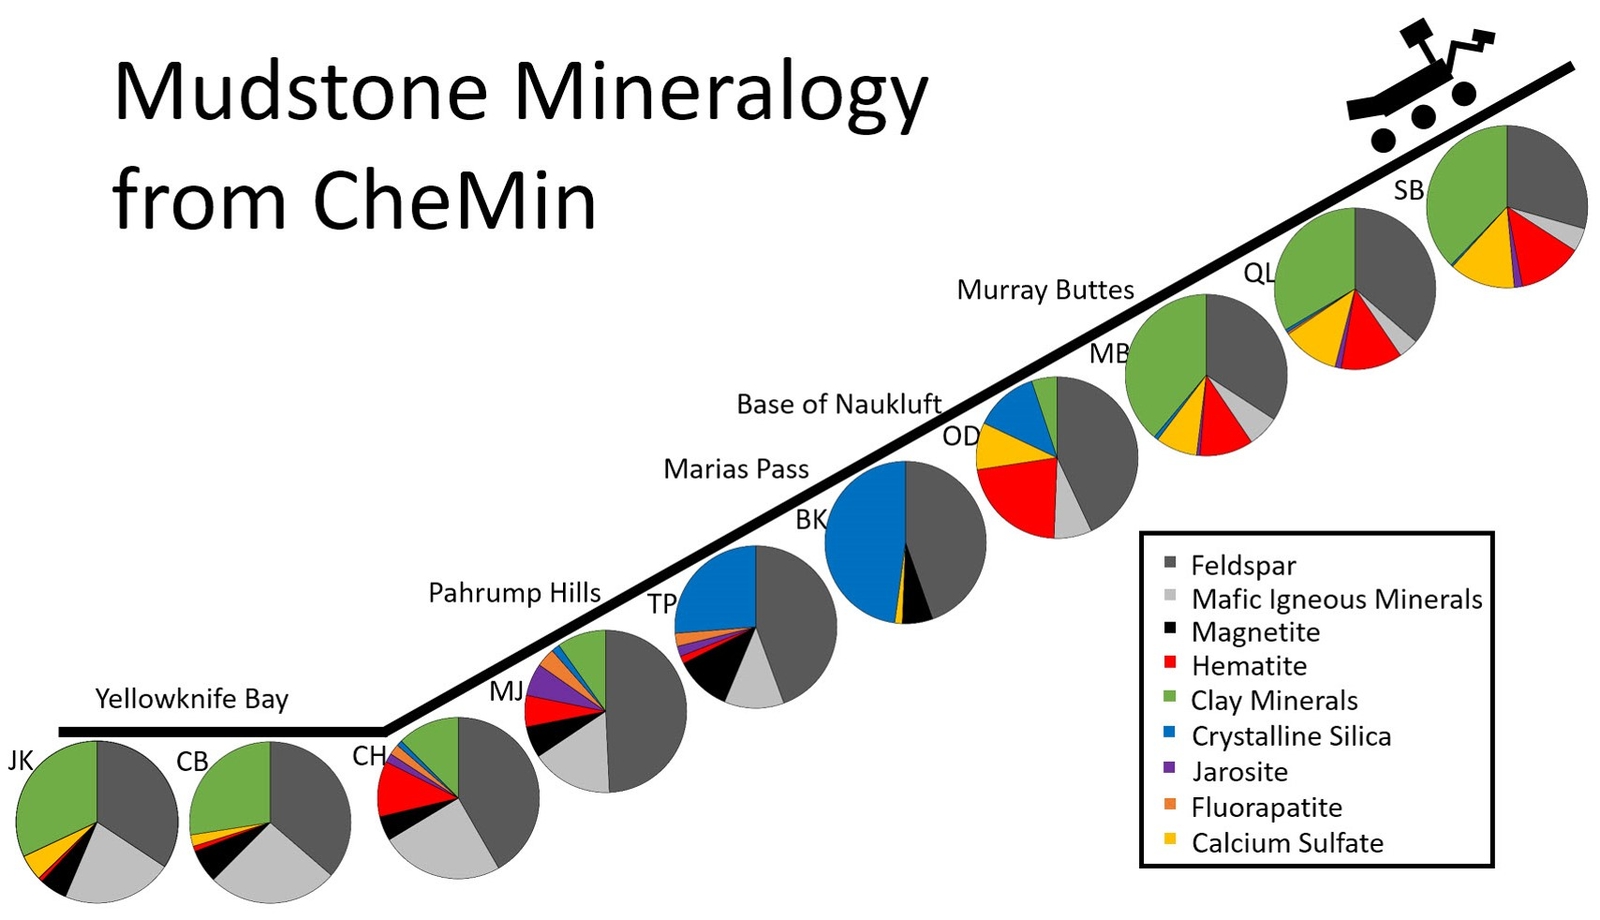 This series of pie charts shows similarities and differences in the mineral composition of mudstone at 10 sites where NASA's Curiosity Mars rover collected rock-powder samples and analyzed them with the rover's Chemistry and Mineralogy (CheMin) instrument.